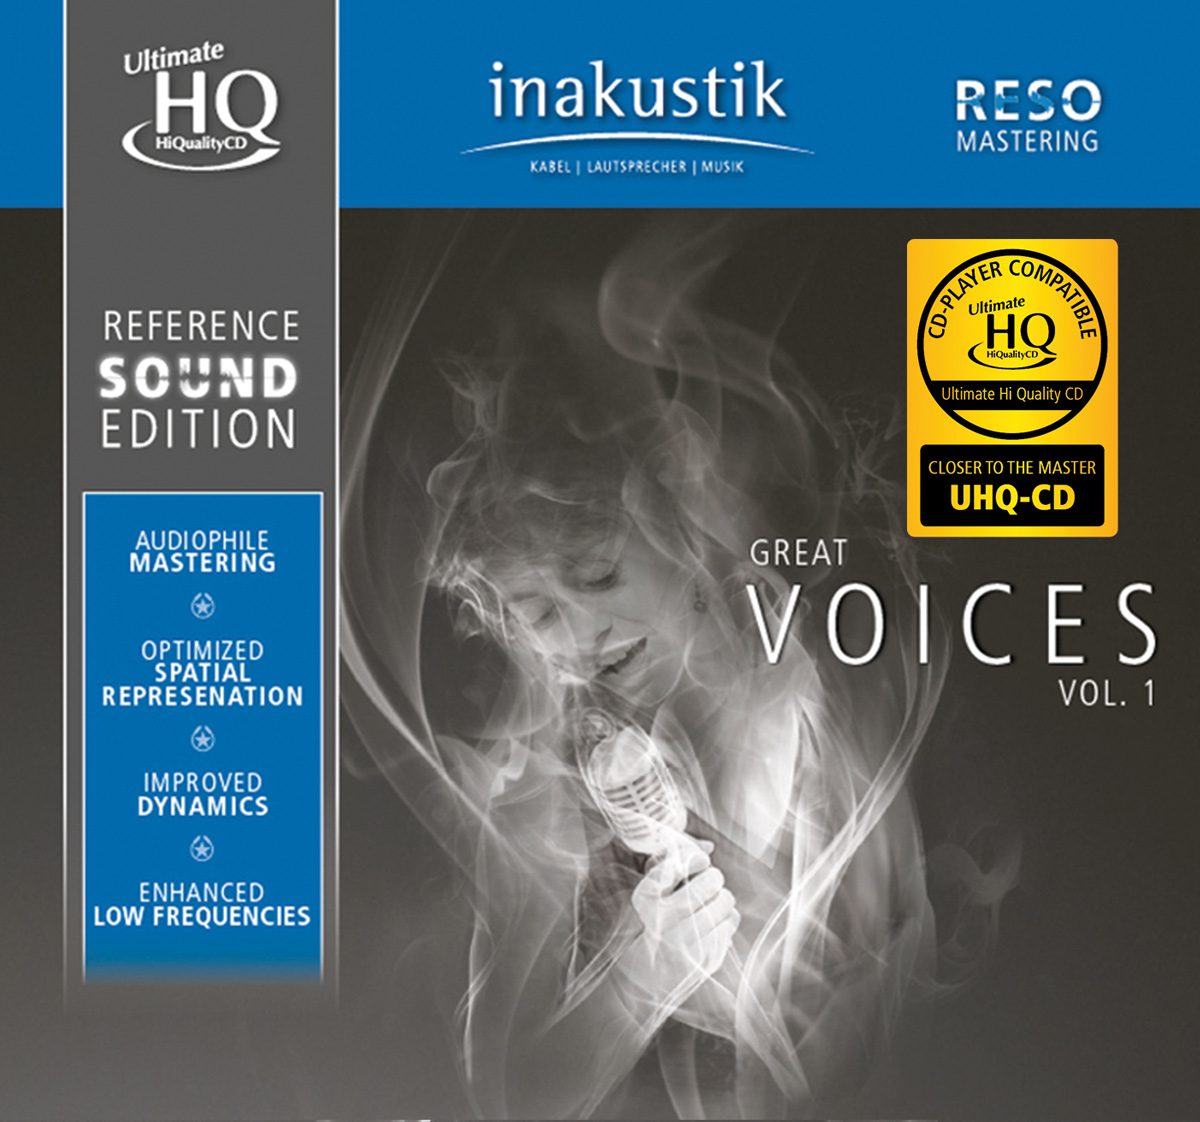 INAKUSTIK CD, Great Voices, 01675015